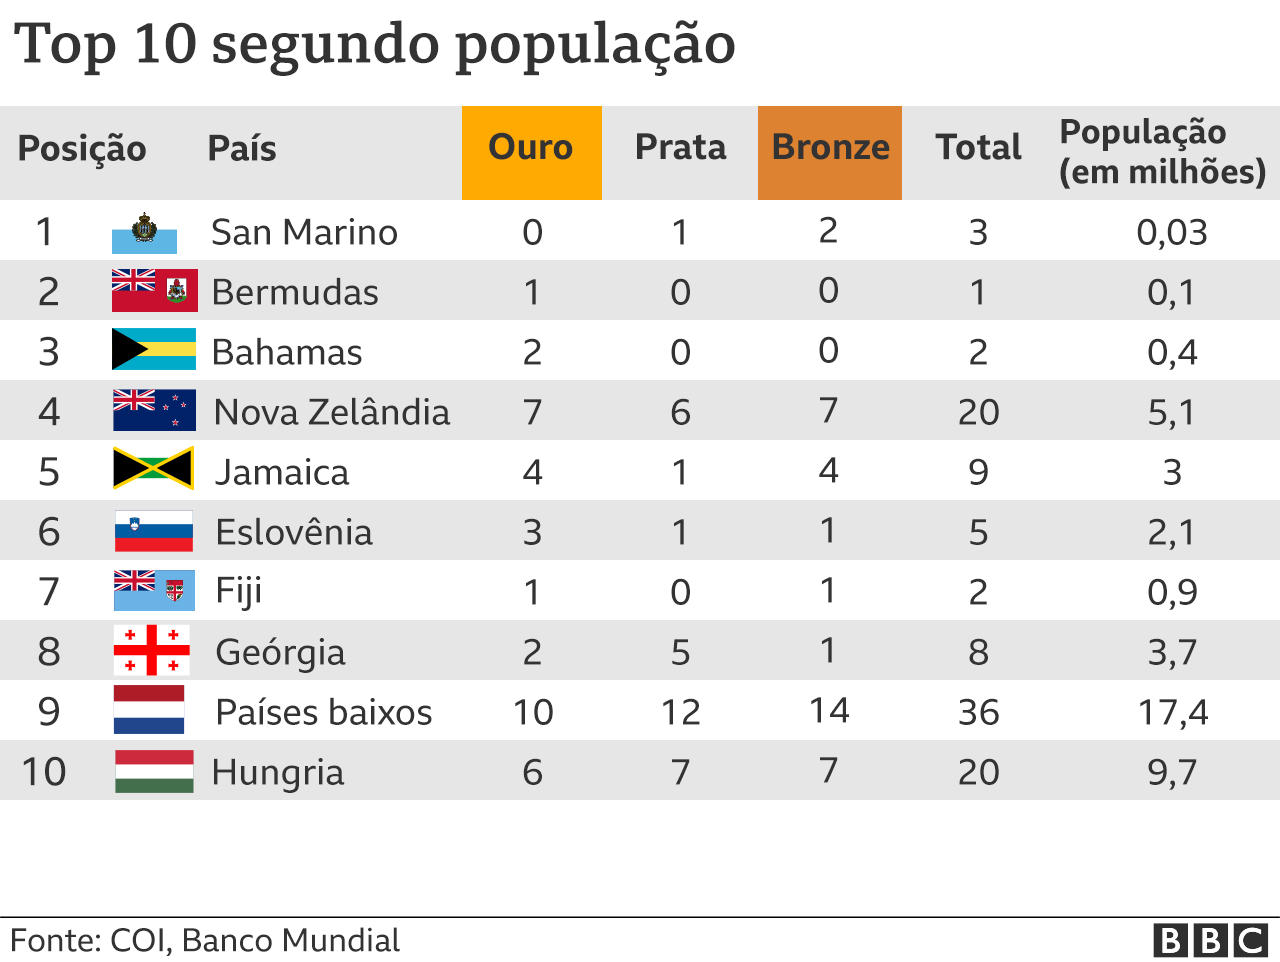 The table shows the medal table by population.